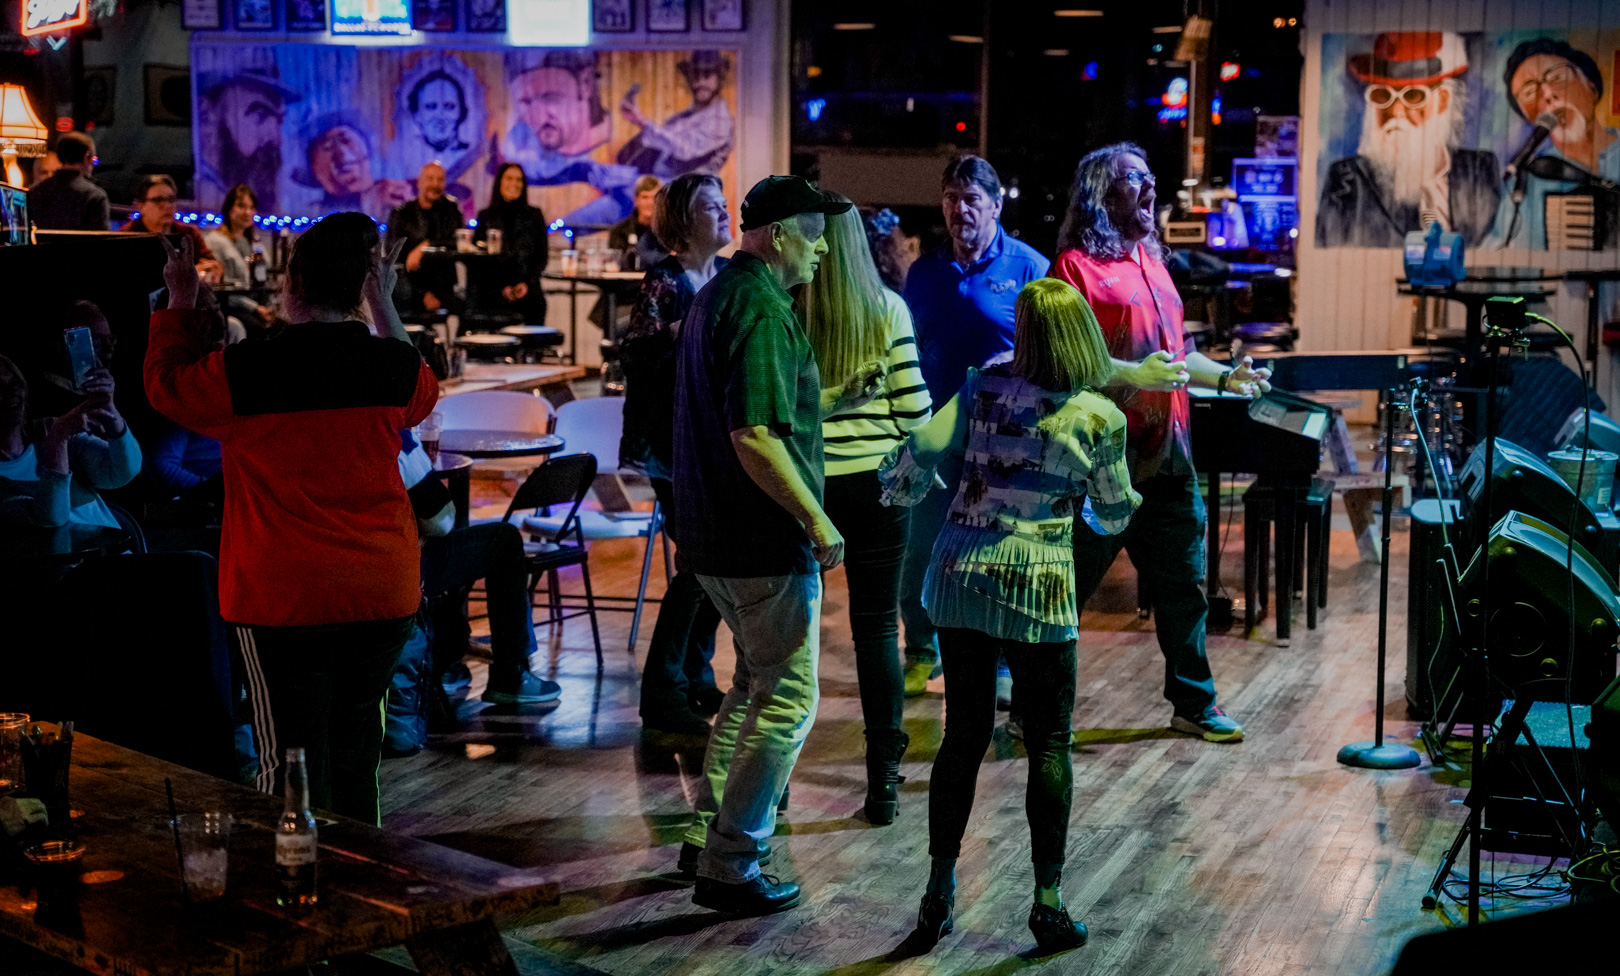 A group of people dancing